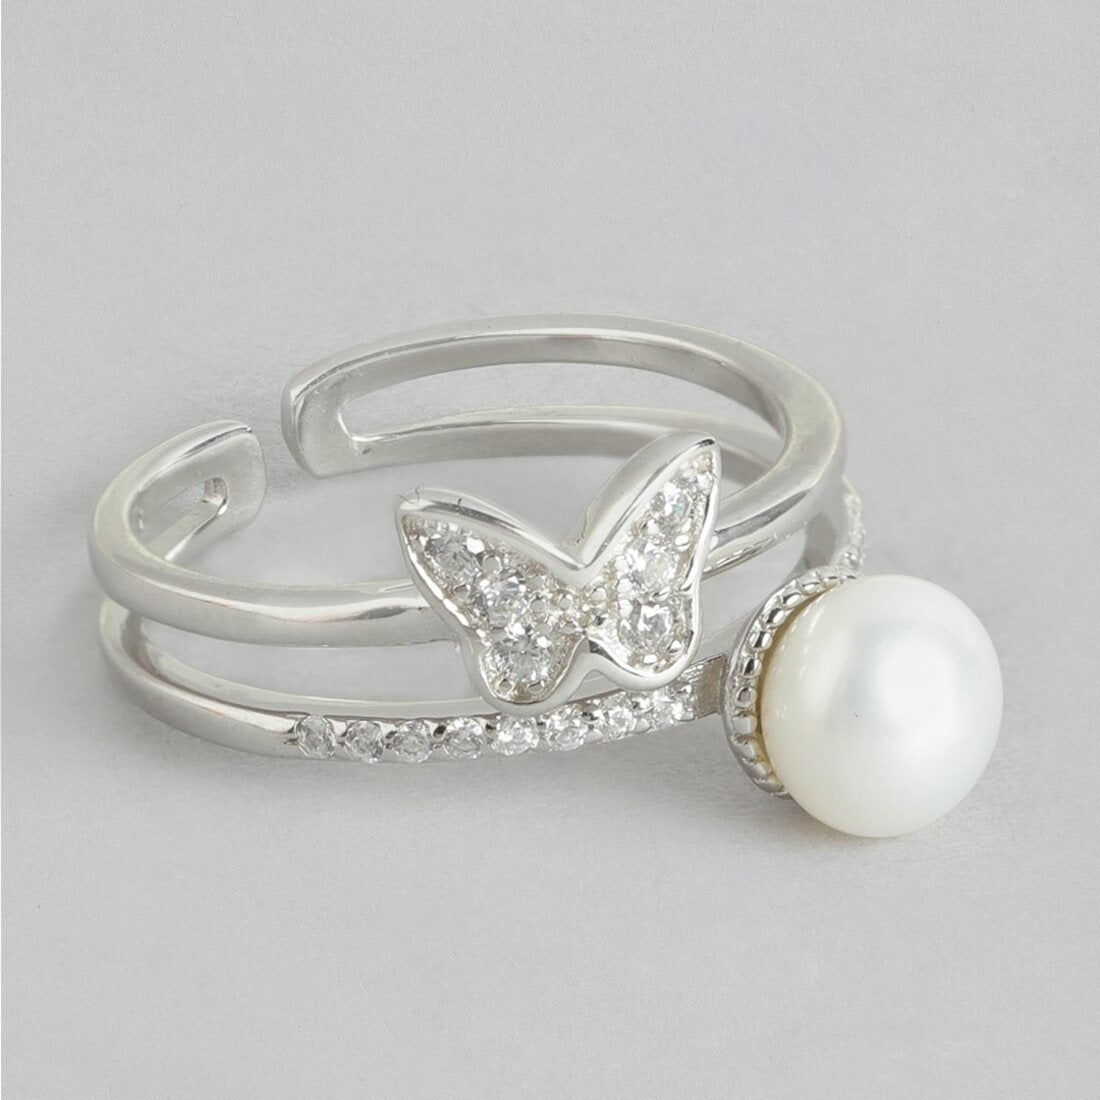 Whimsical Wings of Butterfly Rhodium-Plated 925 Sterling Silver Ring (Adjustable)